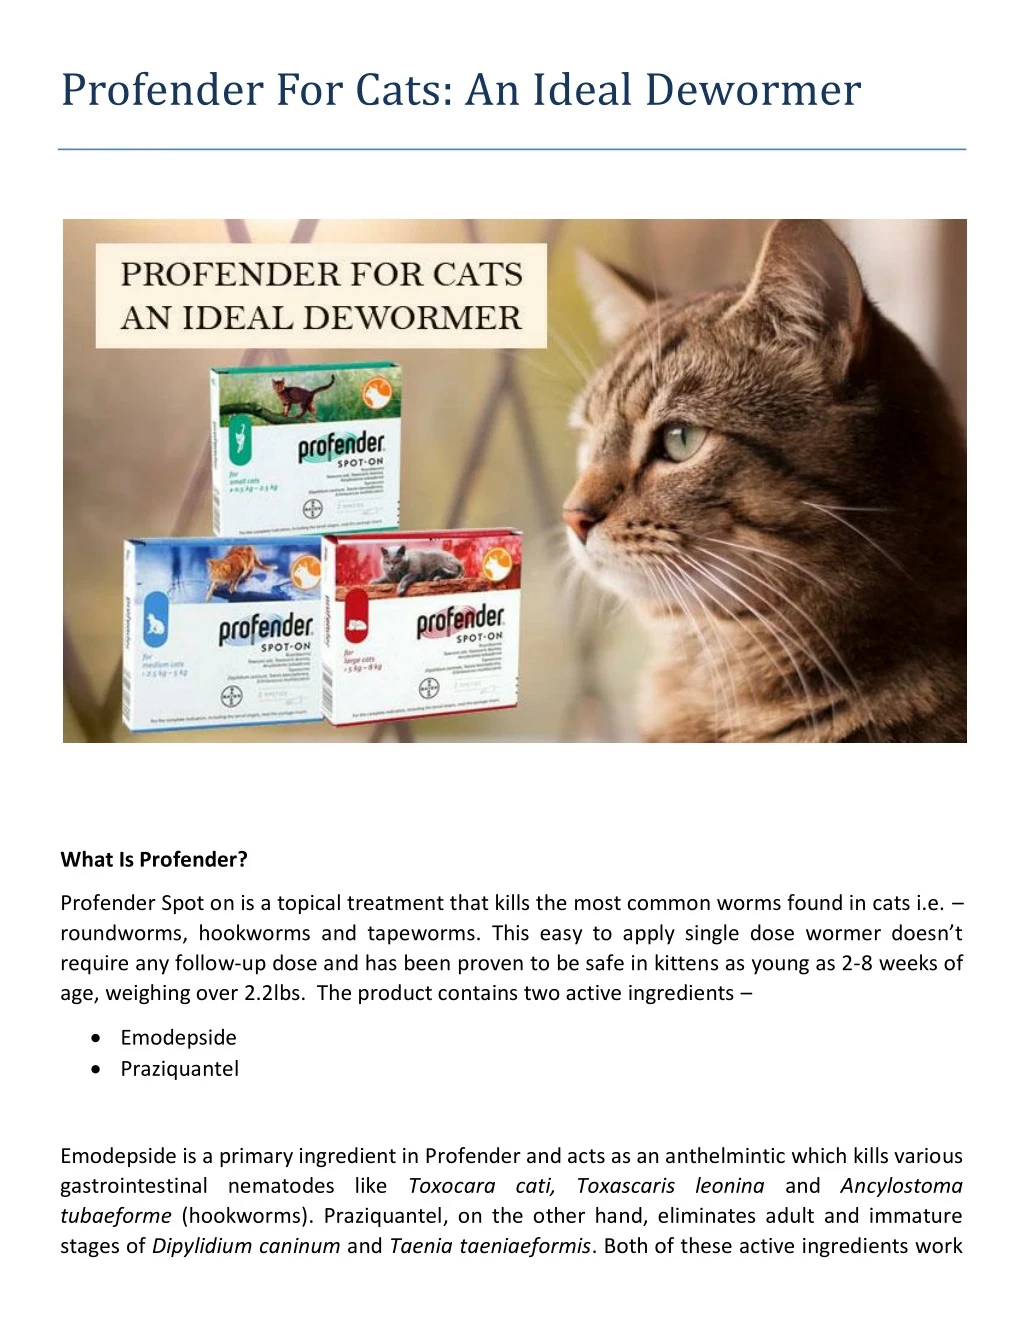 profender for cats an ideal dewormer